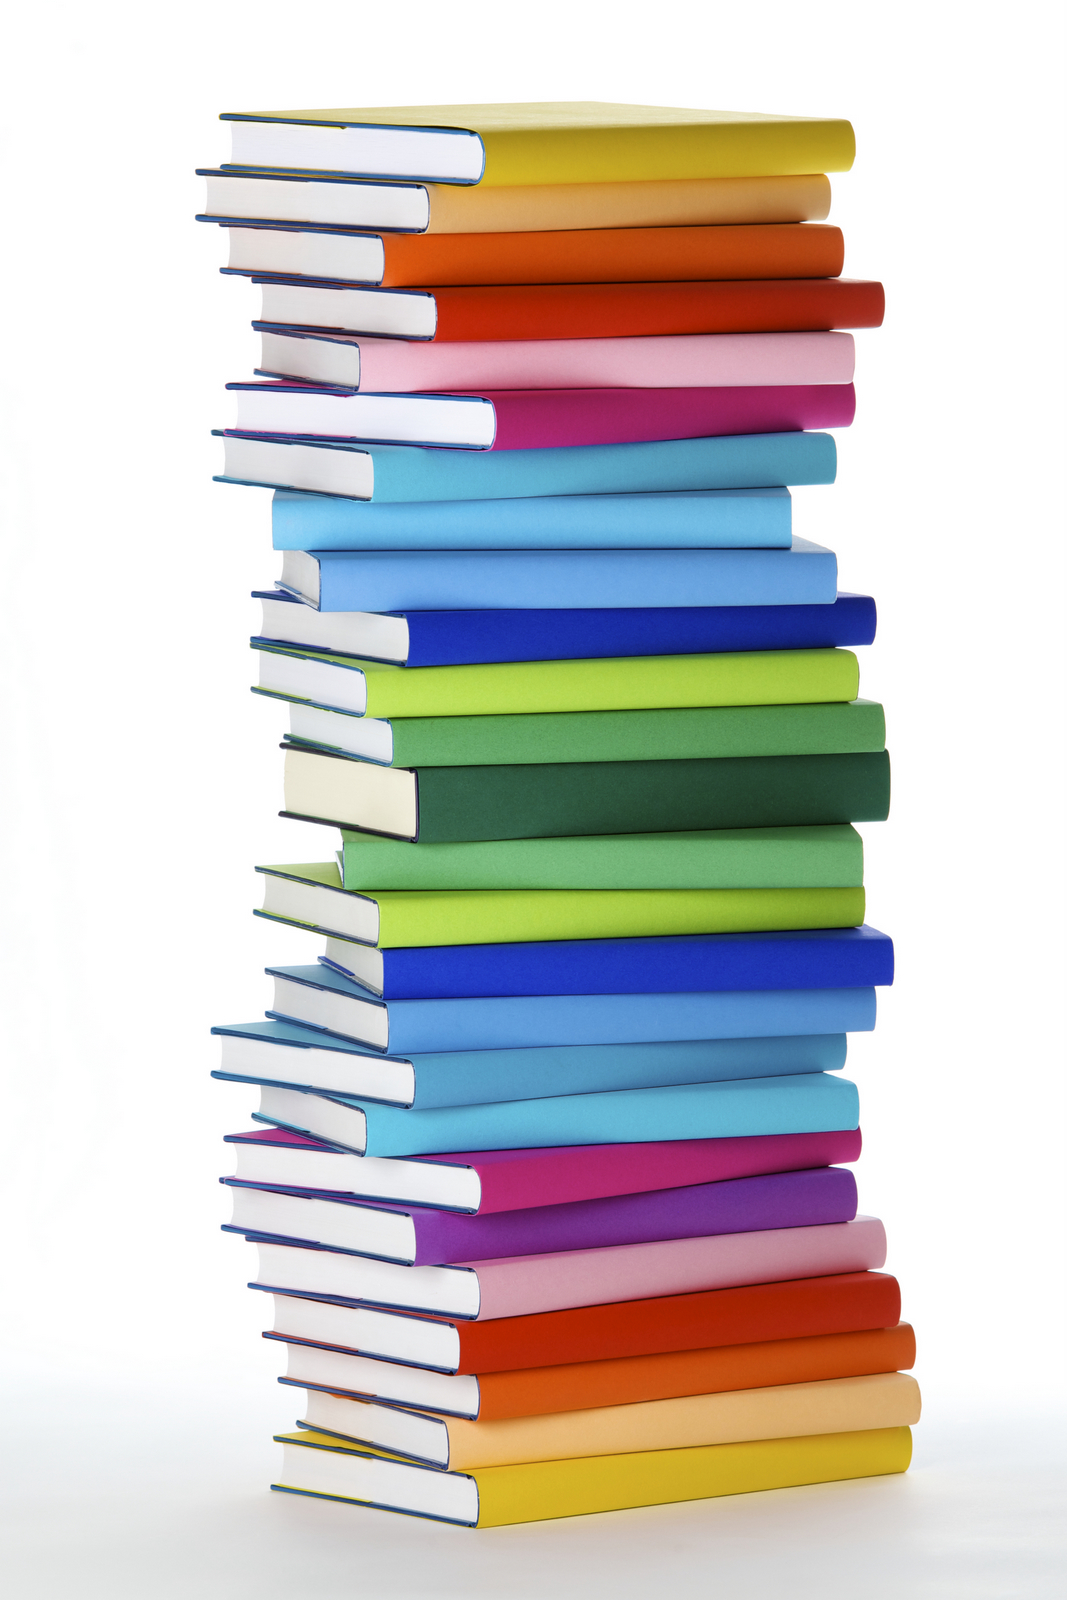 Tall Stack Of Books Craft Projects School Clipart